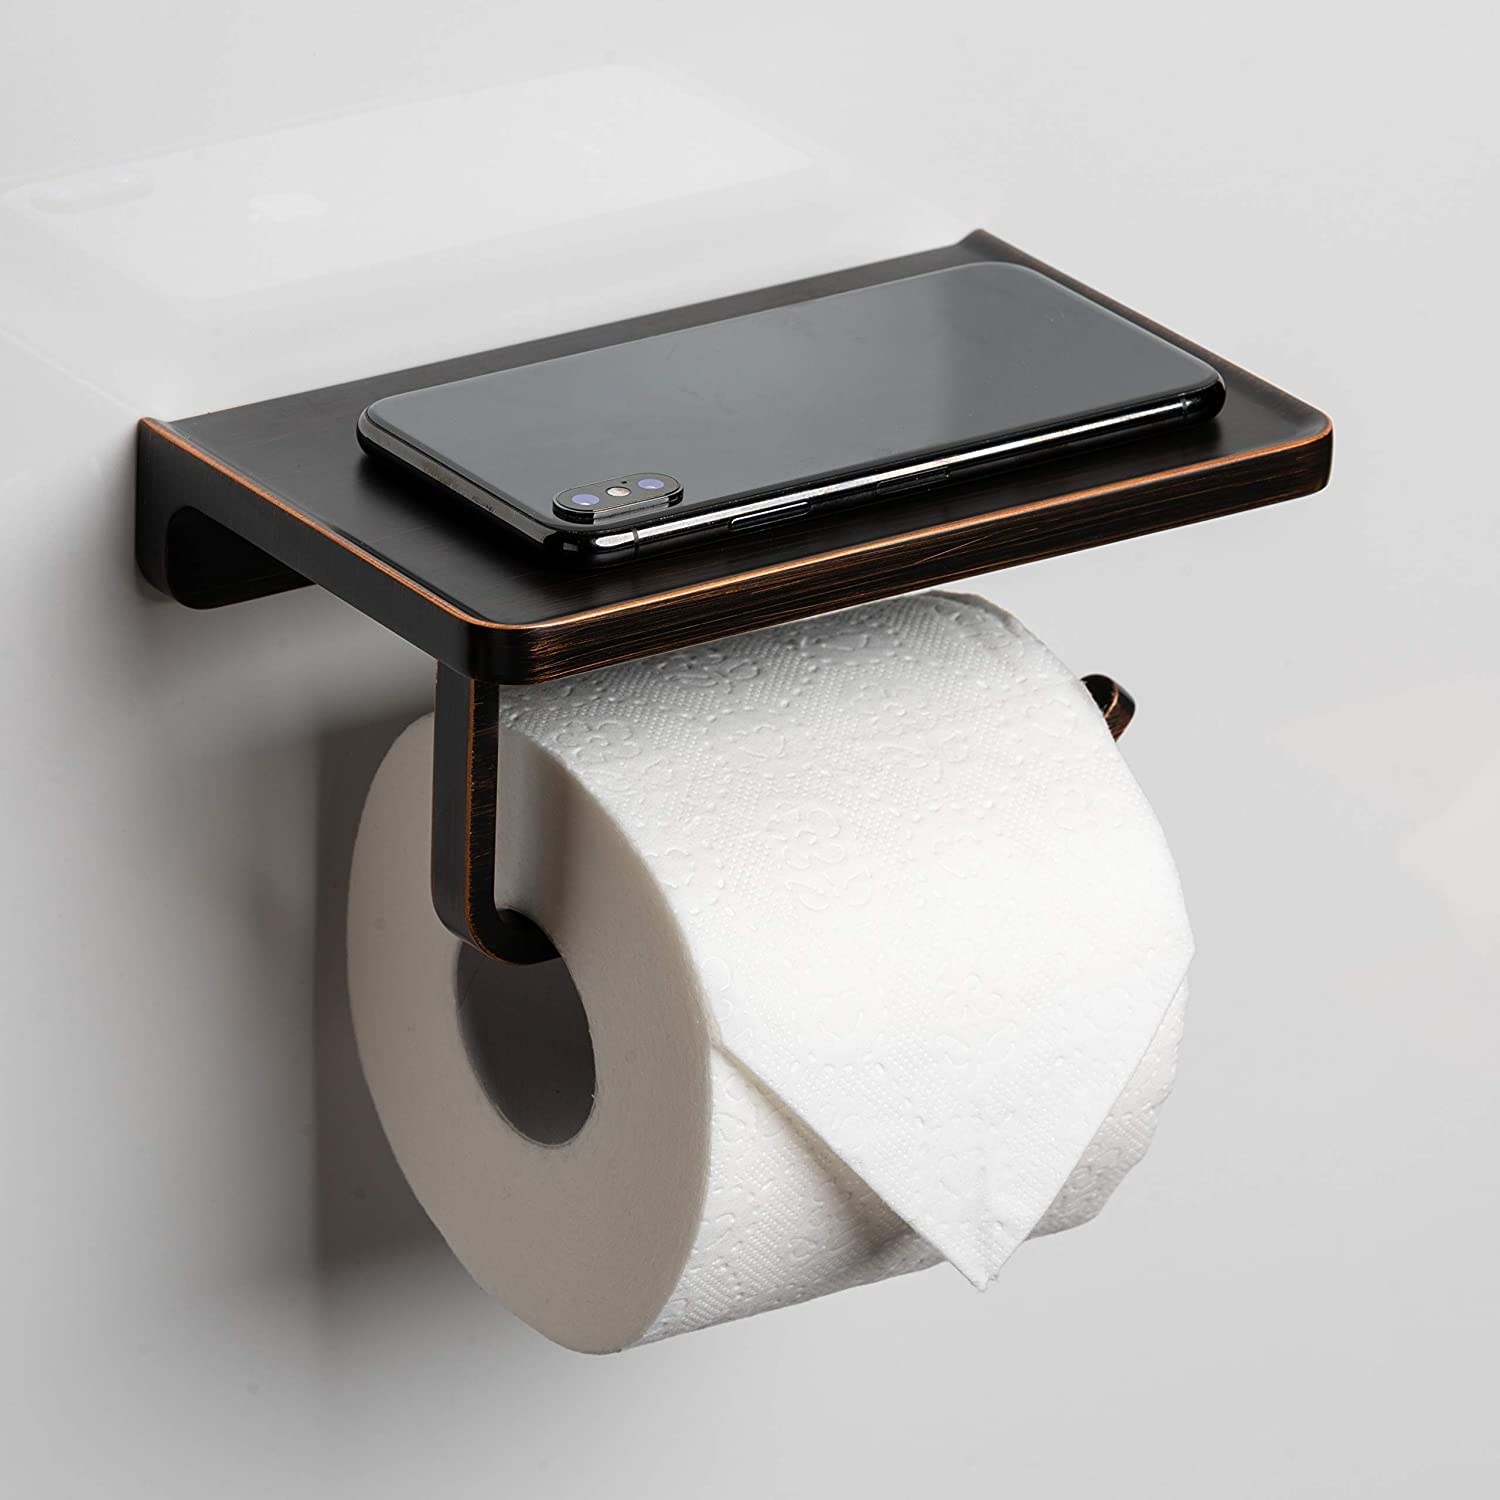 A toilet paper holder with a shelf on top